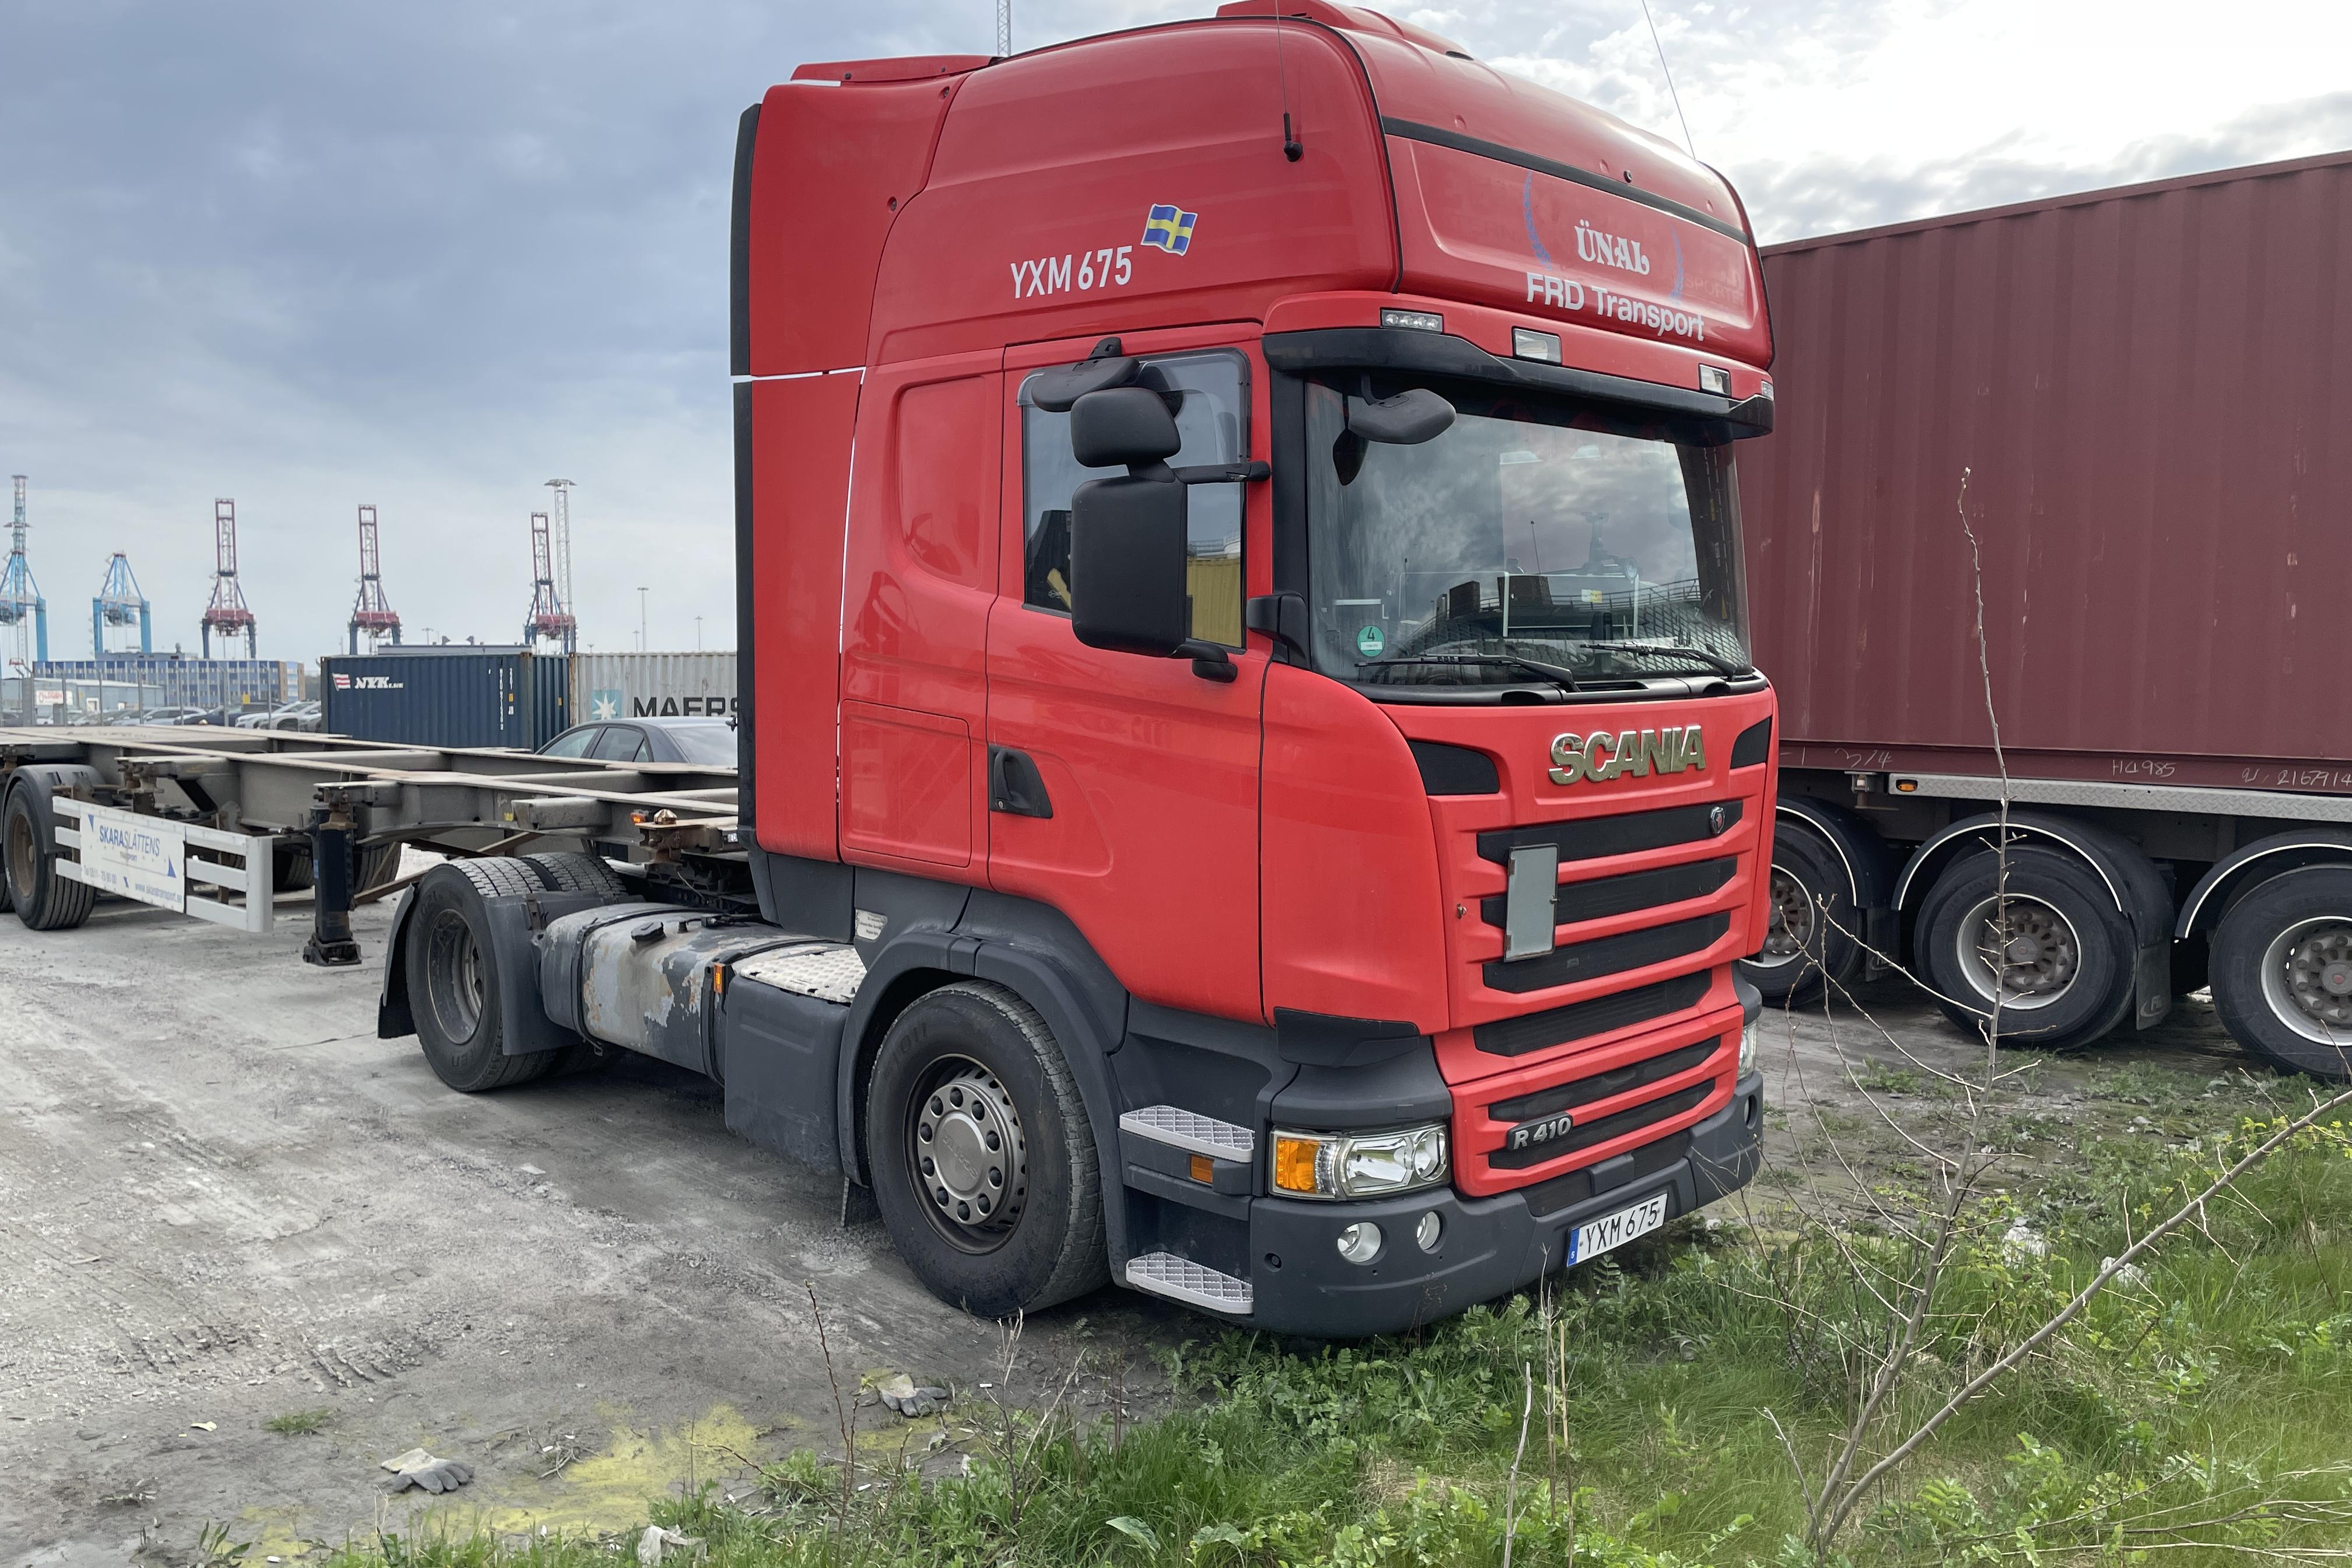 Scania R410 - 564 816 km - Automatic - red - 2017